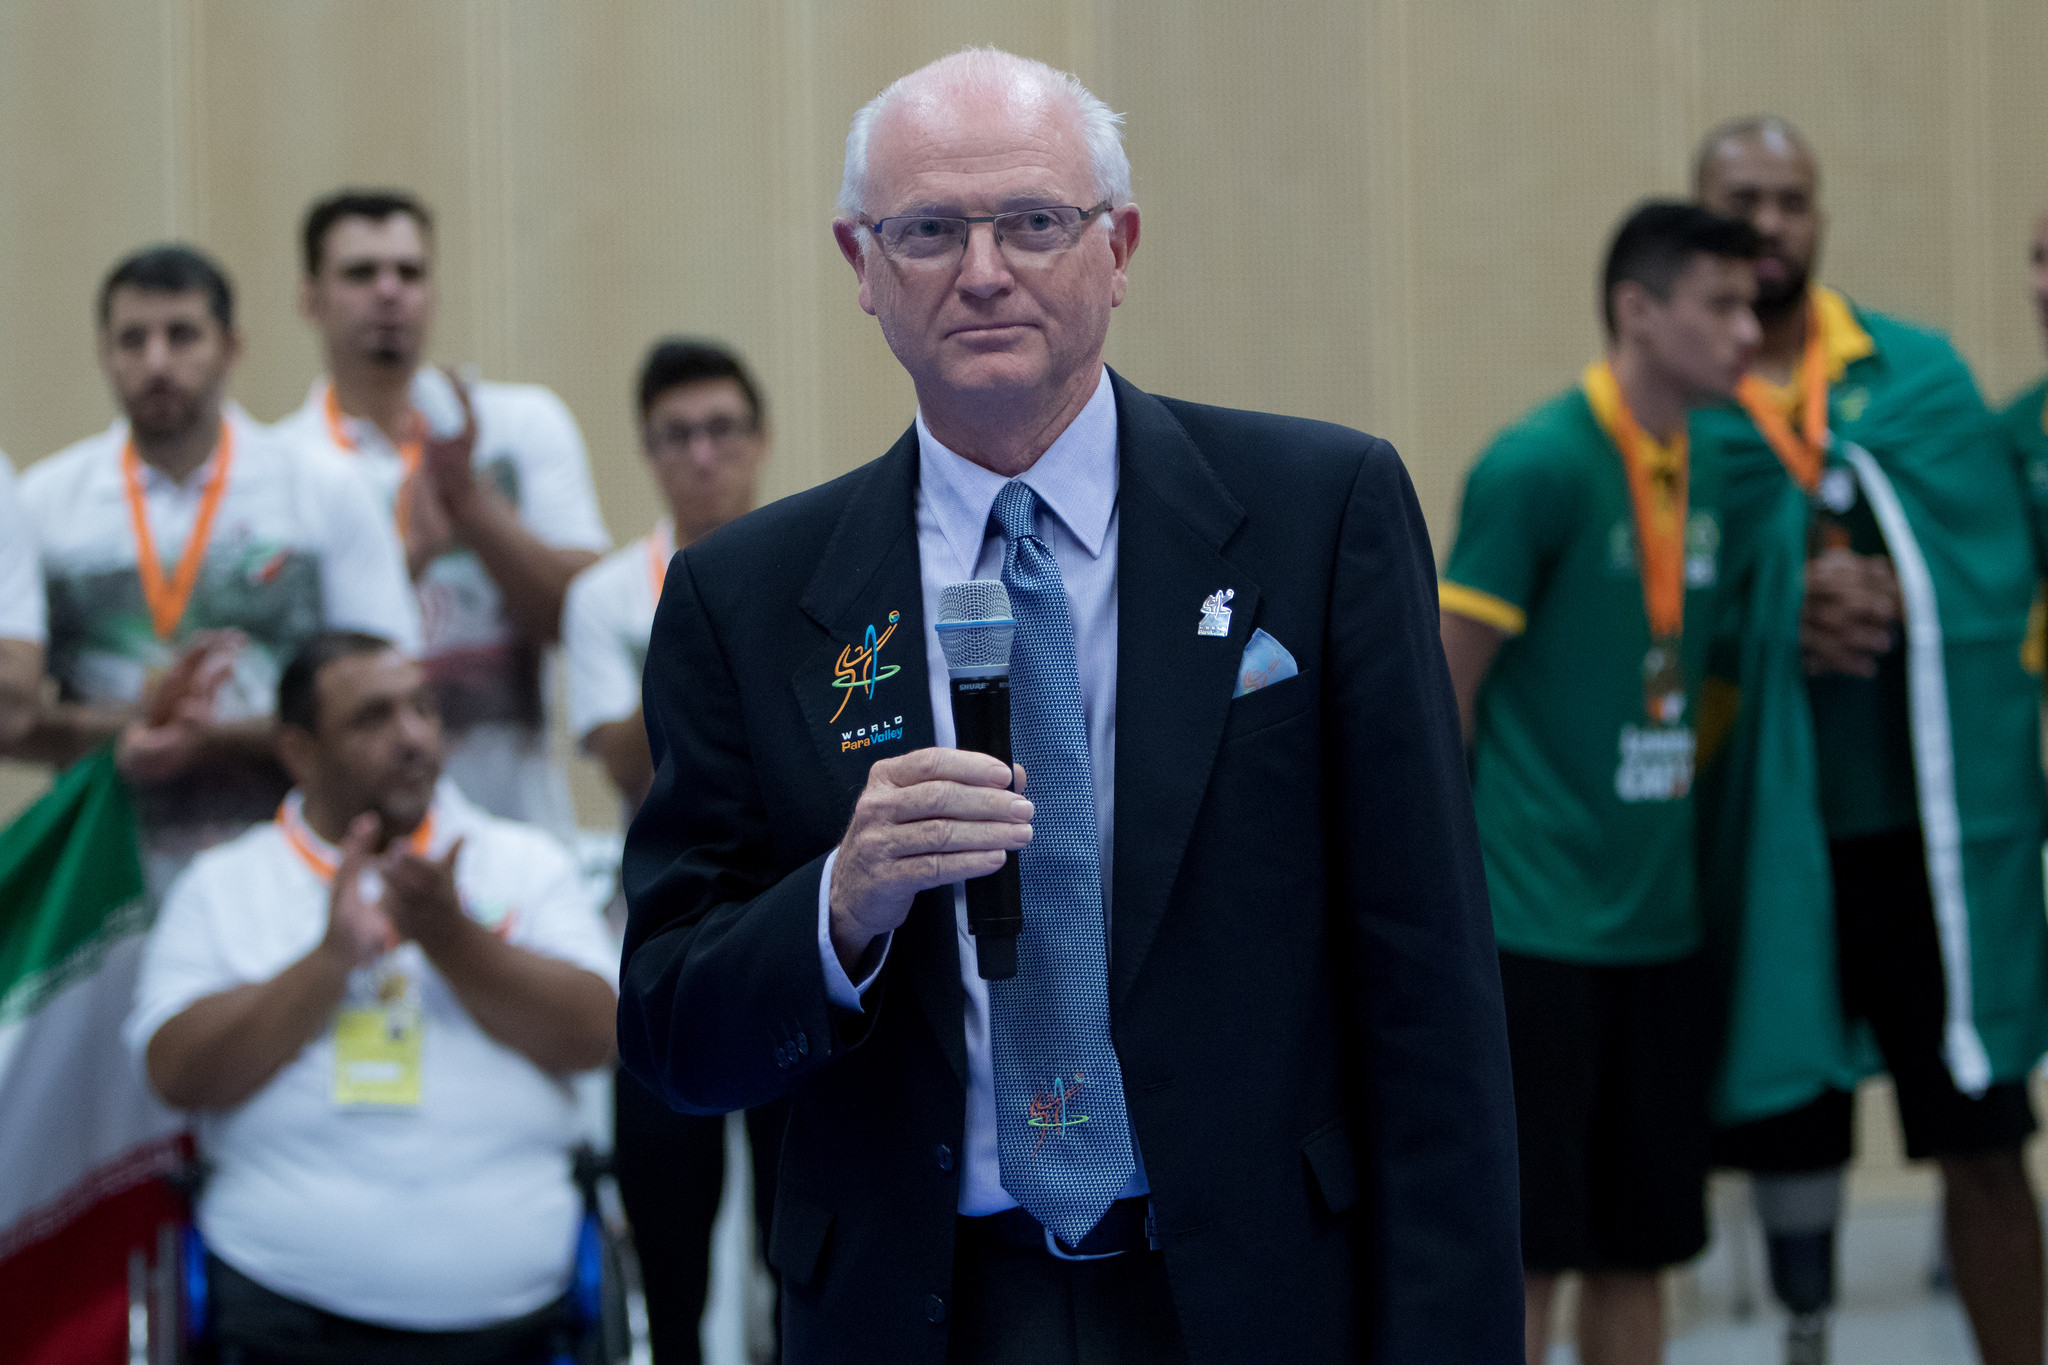 World ParaVolley President declares 2018 "year of change" in address to members 